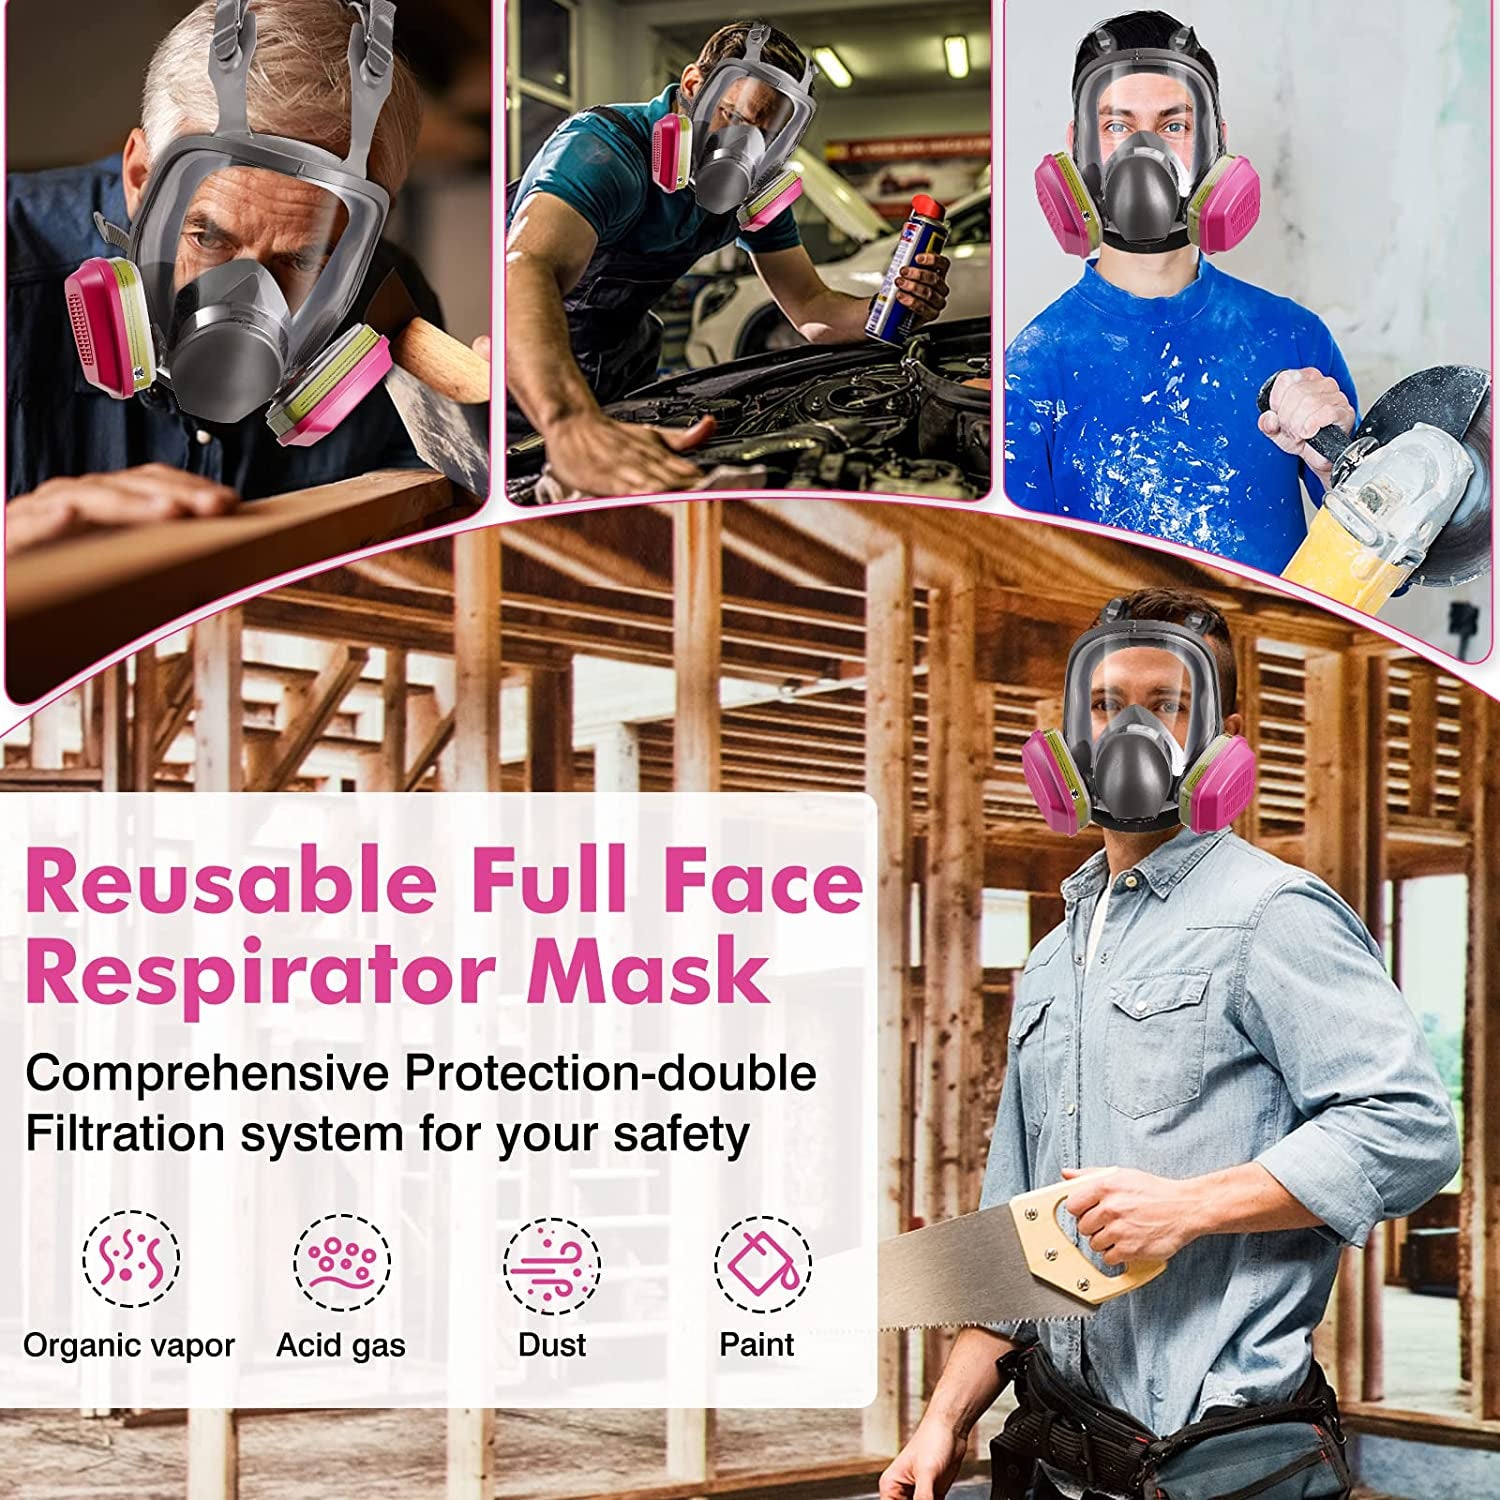 Full-Face Mask Respirator with 60926 Cartridges - Anti-Fog,Reusable Gas Cover Organic Vapor Masks Survival Nuclear,Paint Mask for Painting,Dust,Formaldehyde,Epoxy Resin,Sanding,Cutting,Welding